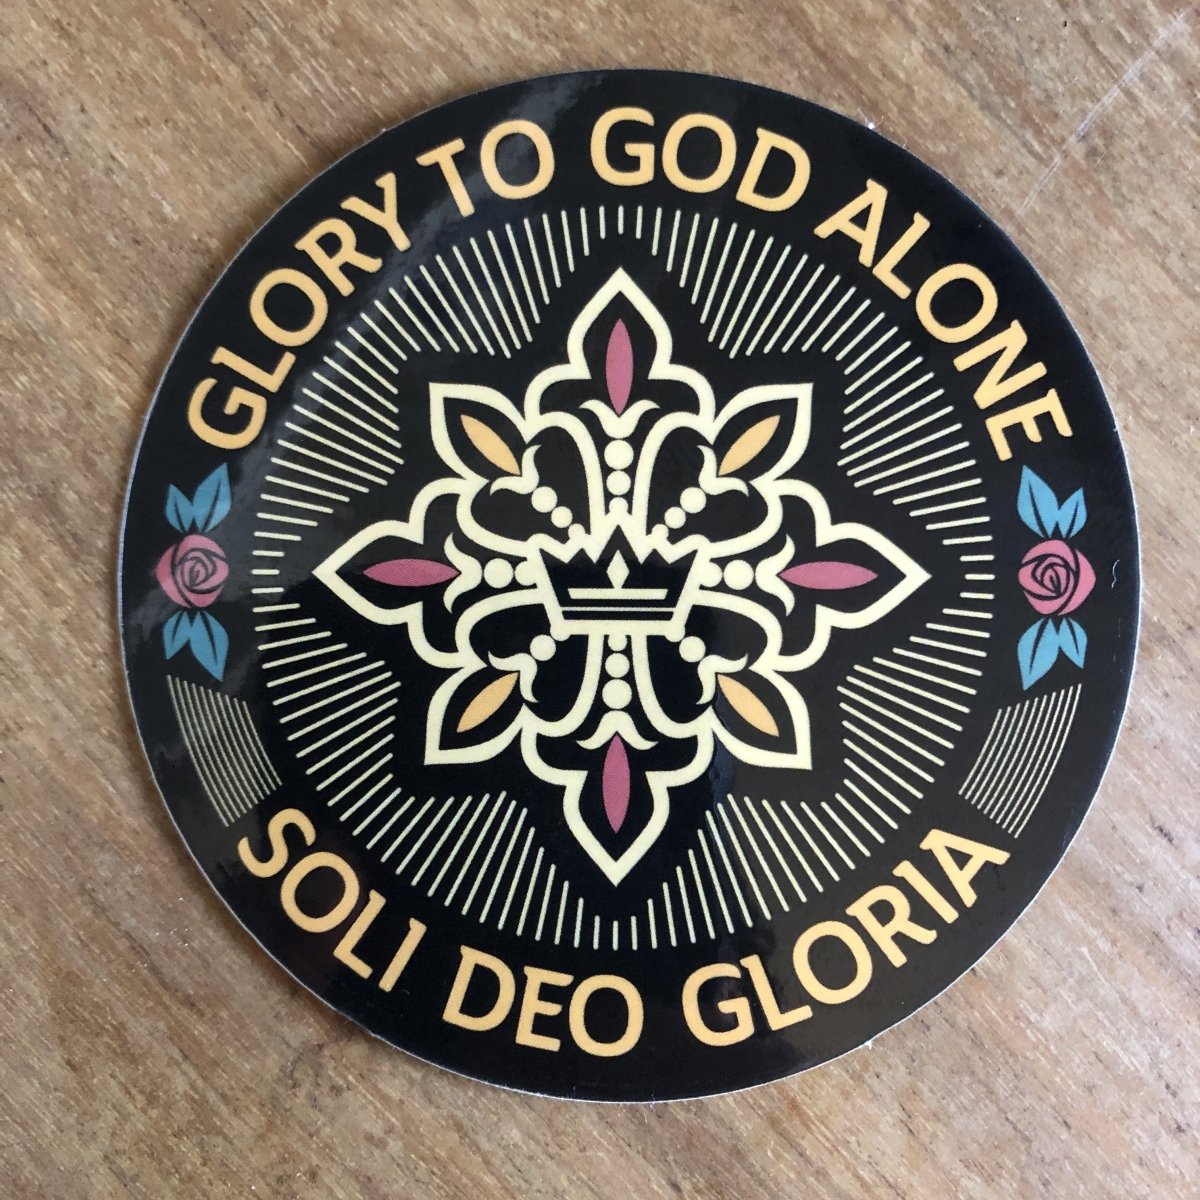 Decal - Soli Deo Gloria Seal - Decal - The Reformed Sage - #reformed# - #reformed_gifts# - #christian_gifts#